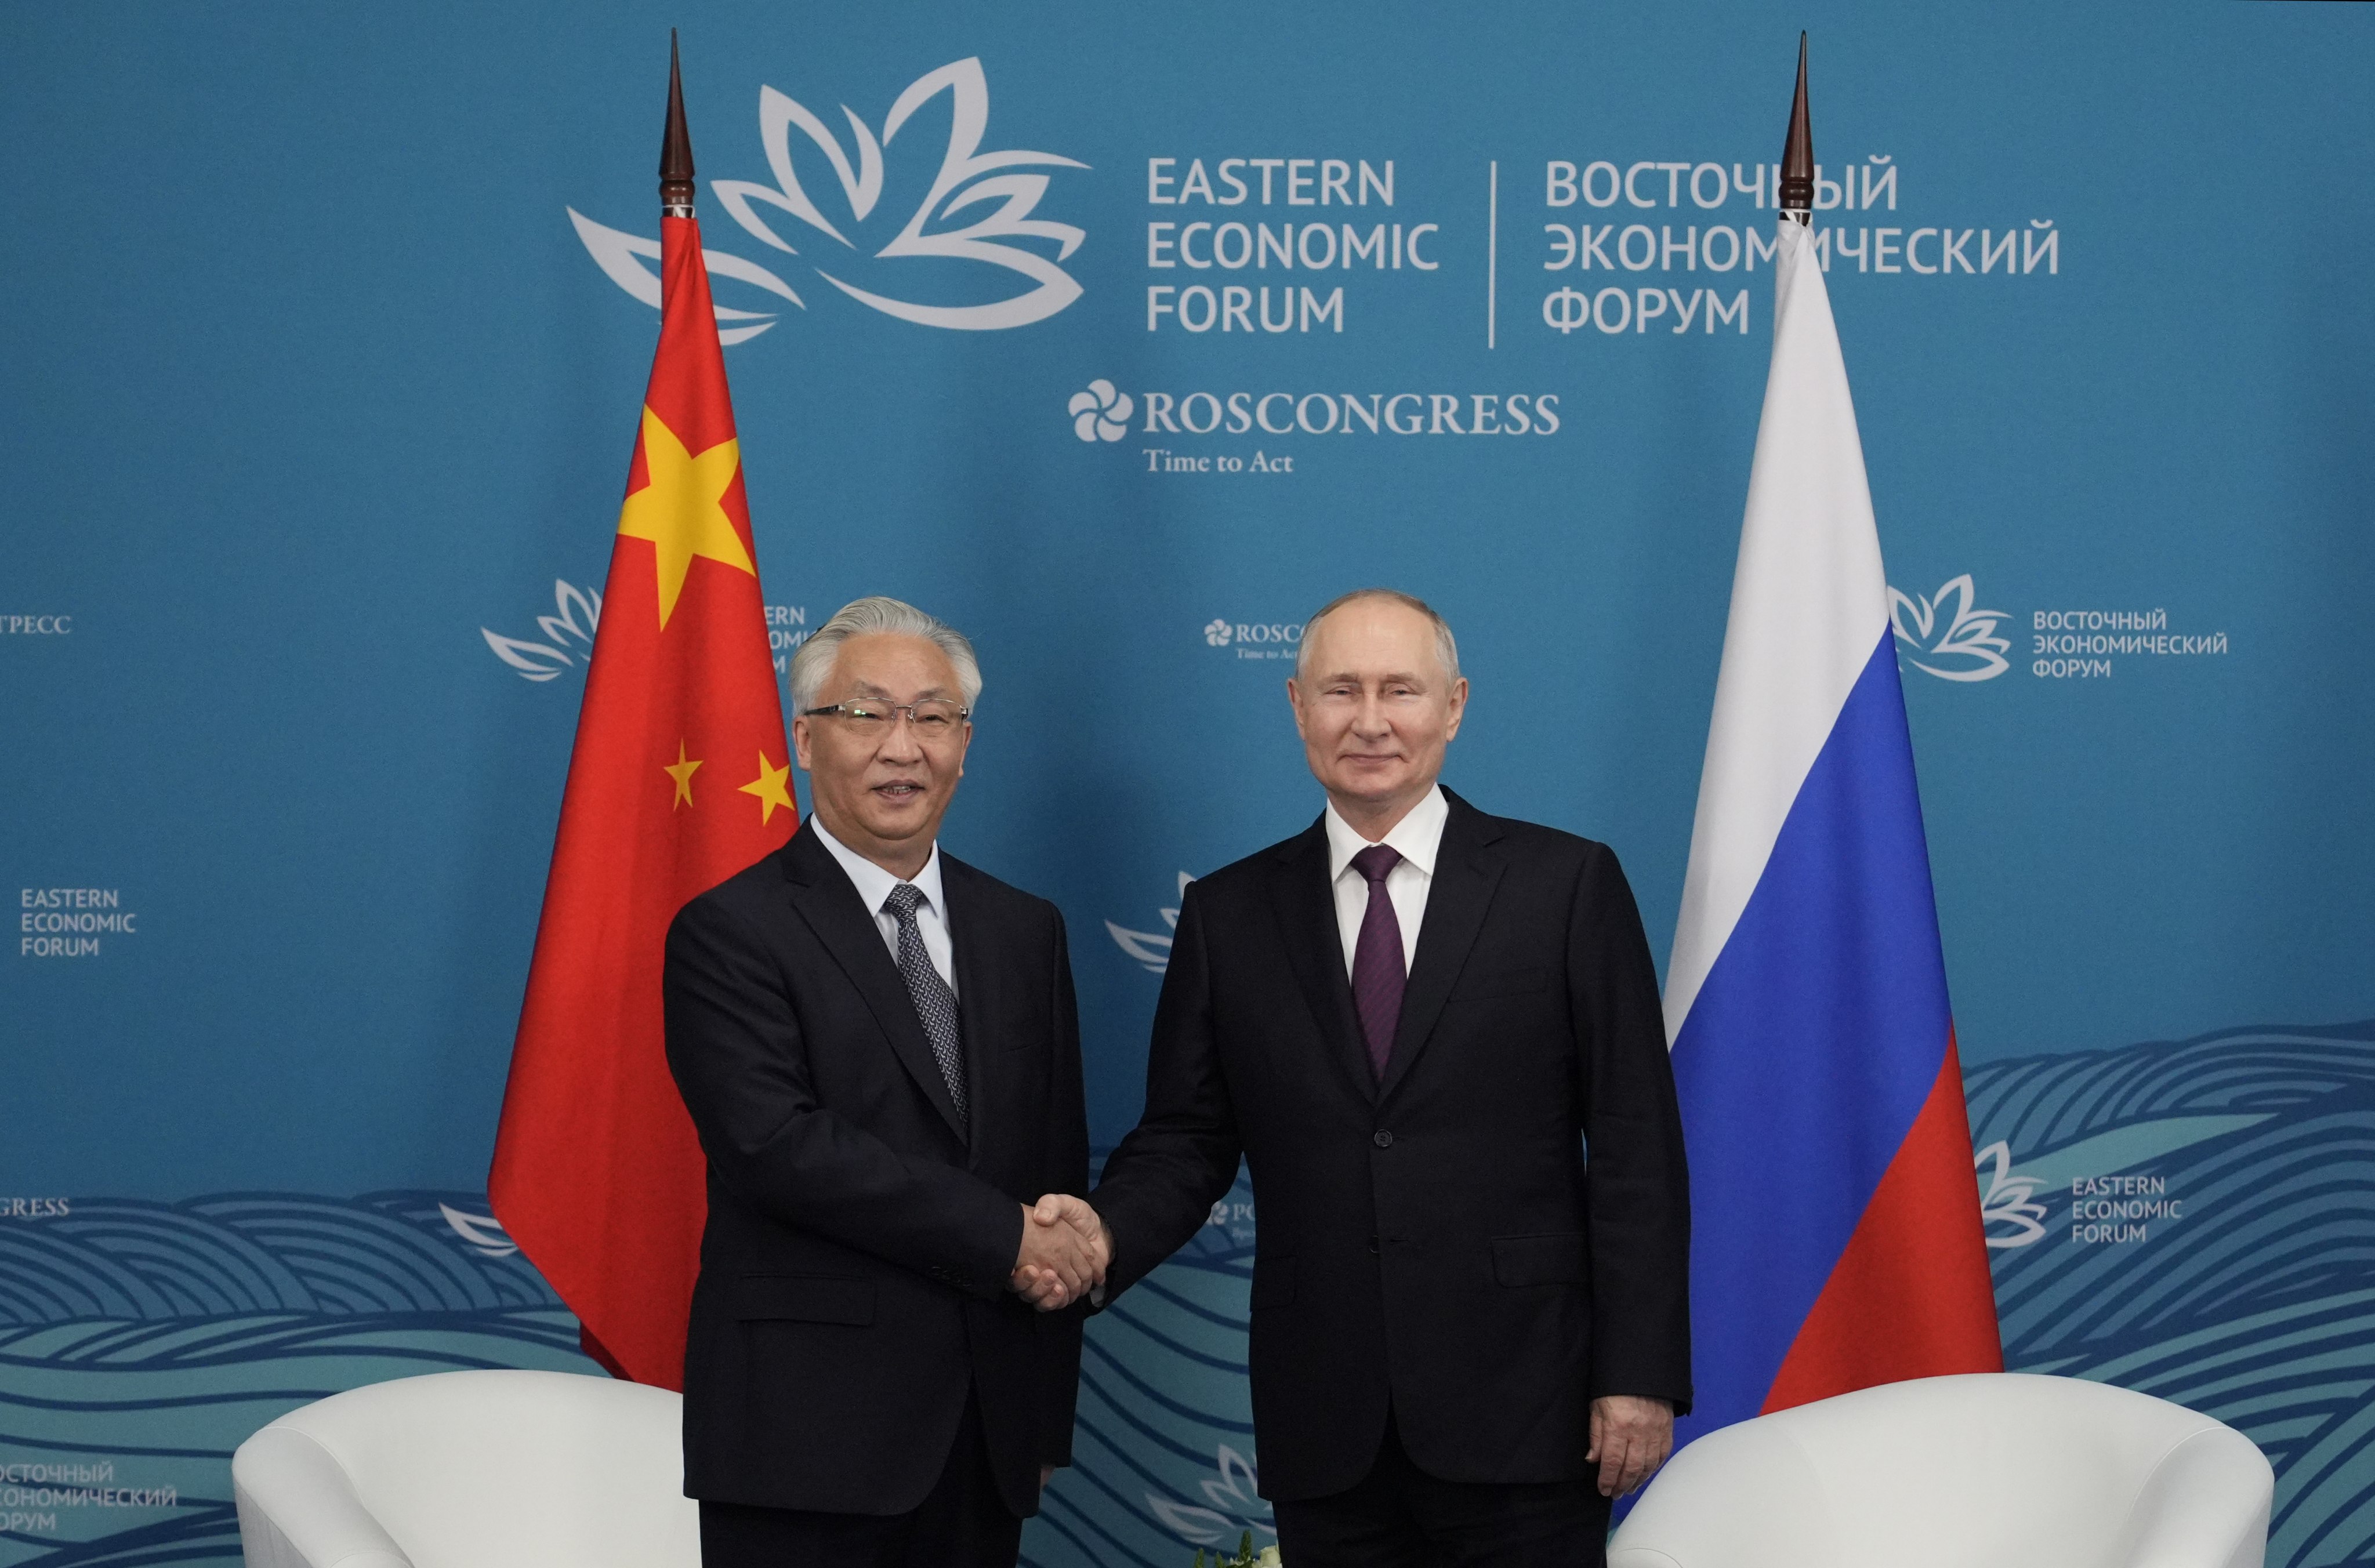 Russian President Vladimir Putin (right) poses with Chinese Vice-Premier Zhang Guoqing at the Eastern Economic Forum in Vladivostok, Russia, on Tuesday. Photo: EPA-EFE